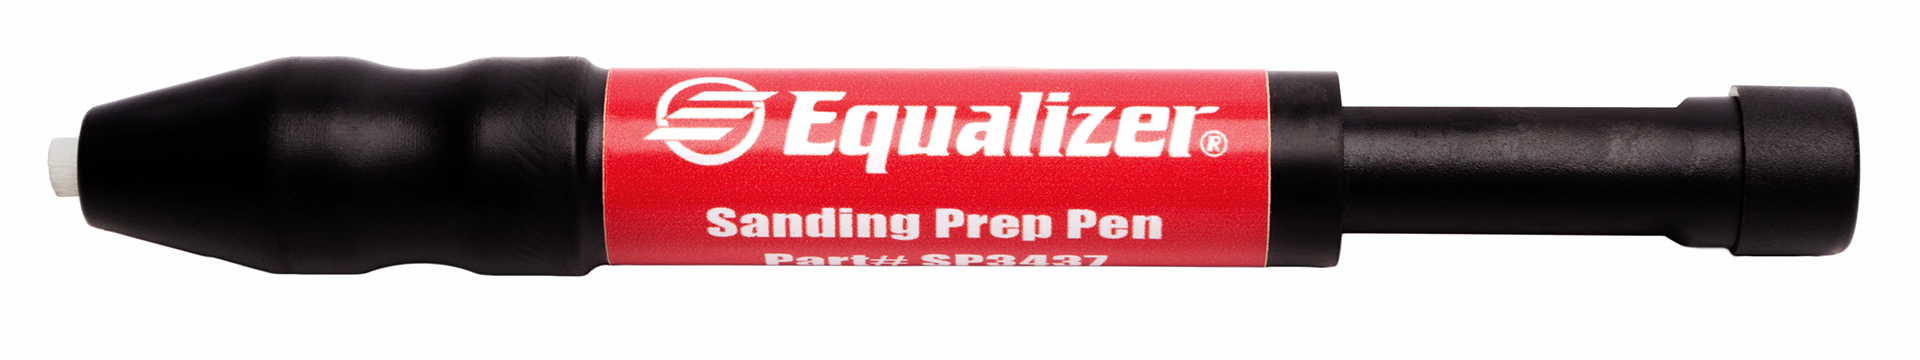 EQUALIZER SANDING PREP PEN,AUTOGLASS ,REMOVAL AND REPAIR-SP3437 - JAAGS